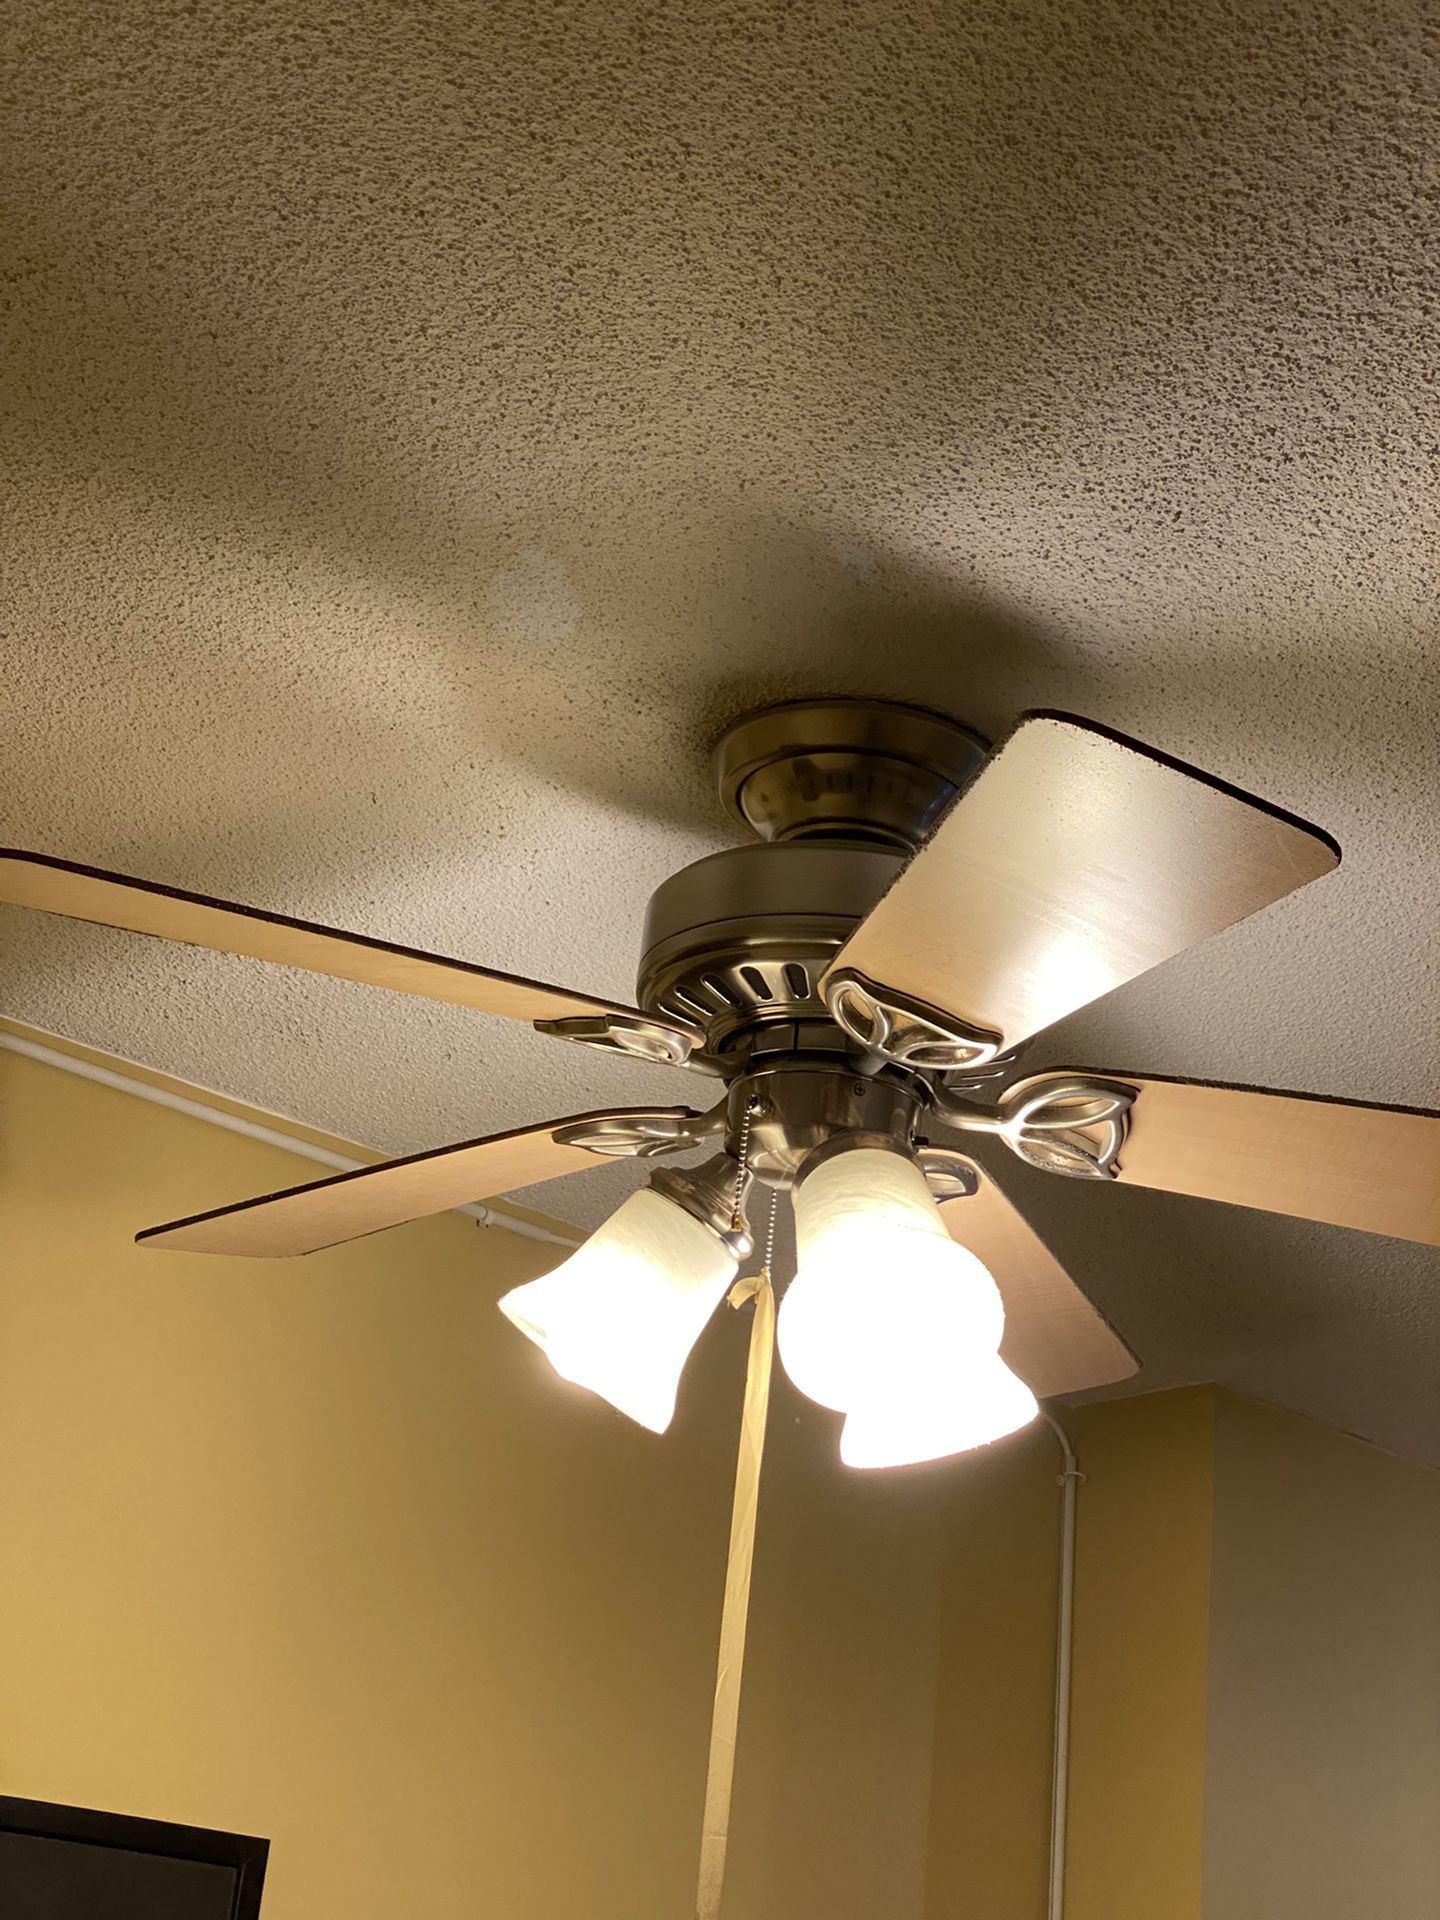 Ceiling Fan With Lights For Only 30$